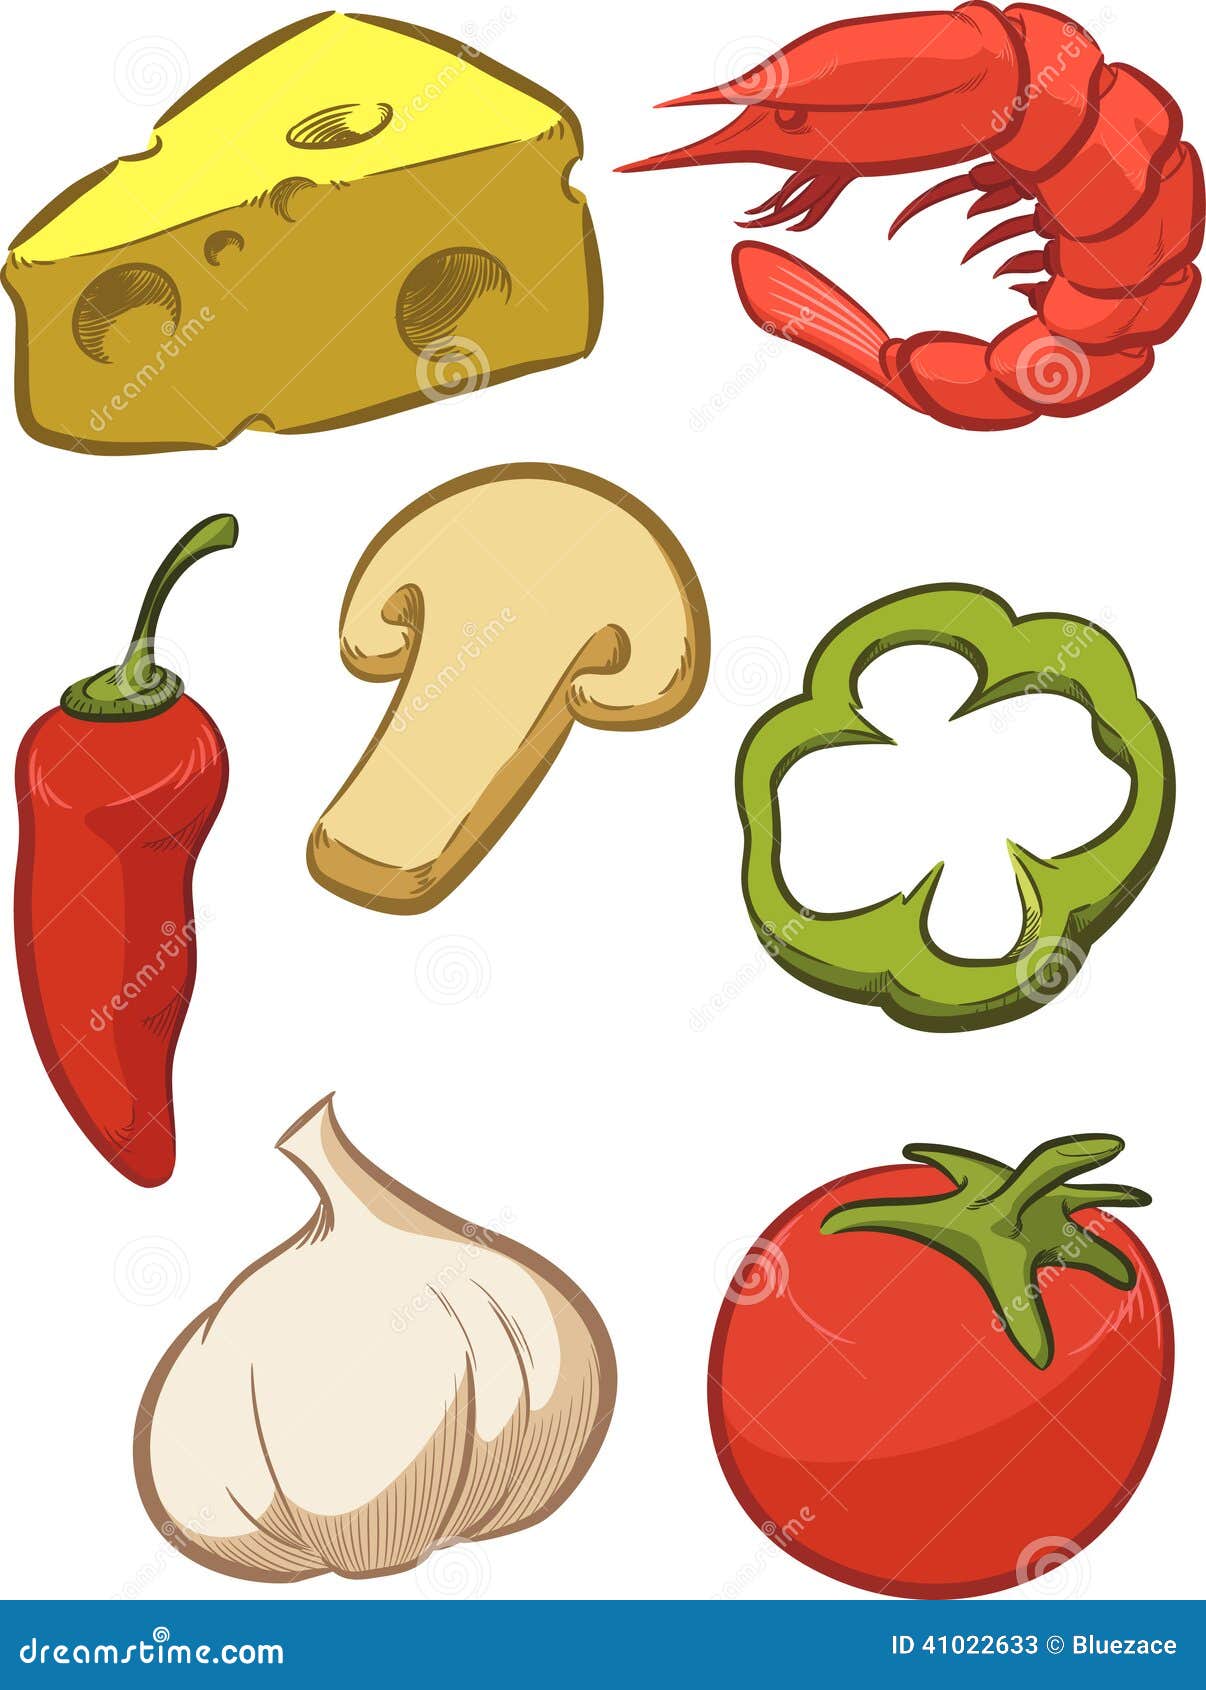 pizza ingredients clipart - photo #10